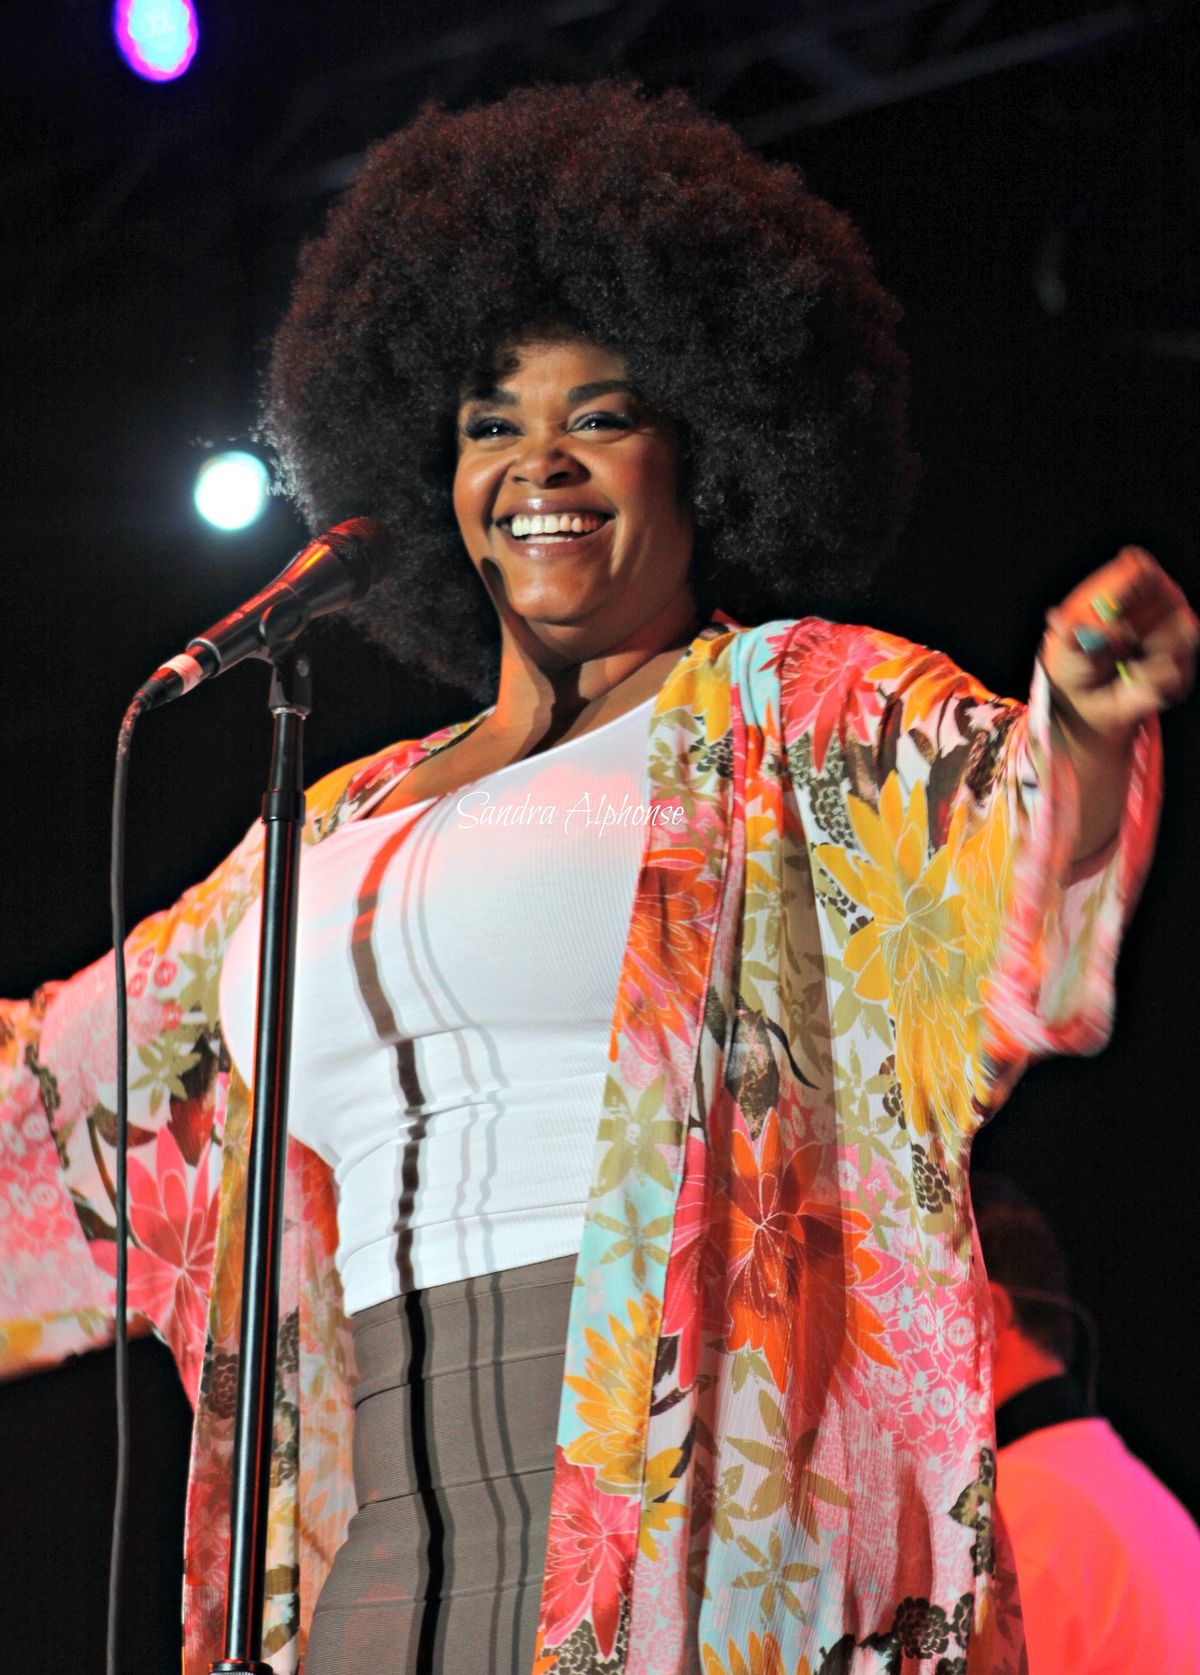 Happy birthday to the one and only, Jill Scott! She turns 46 today! 